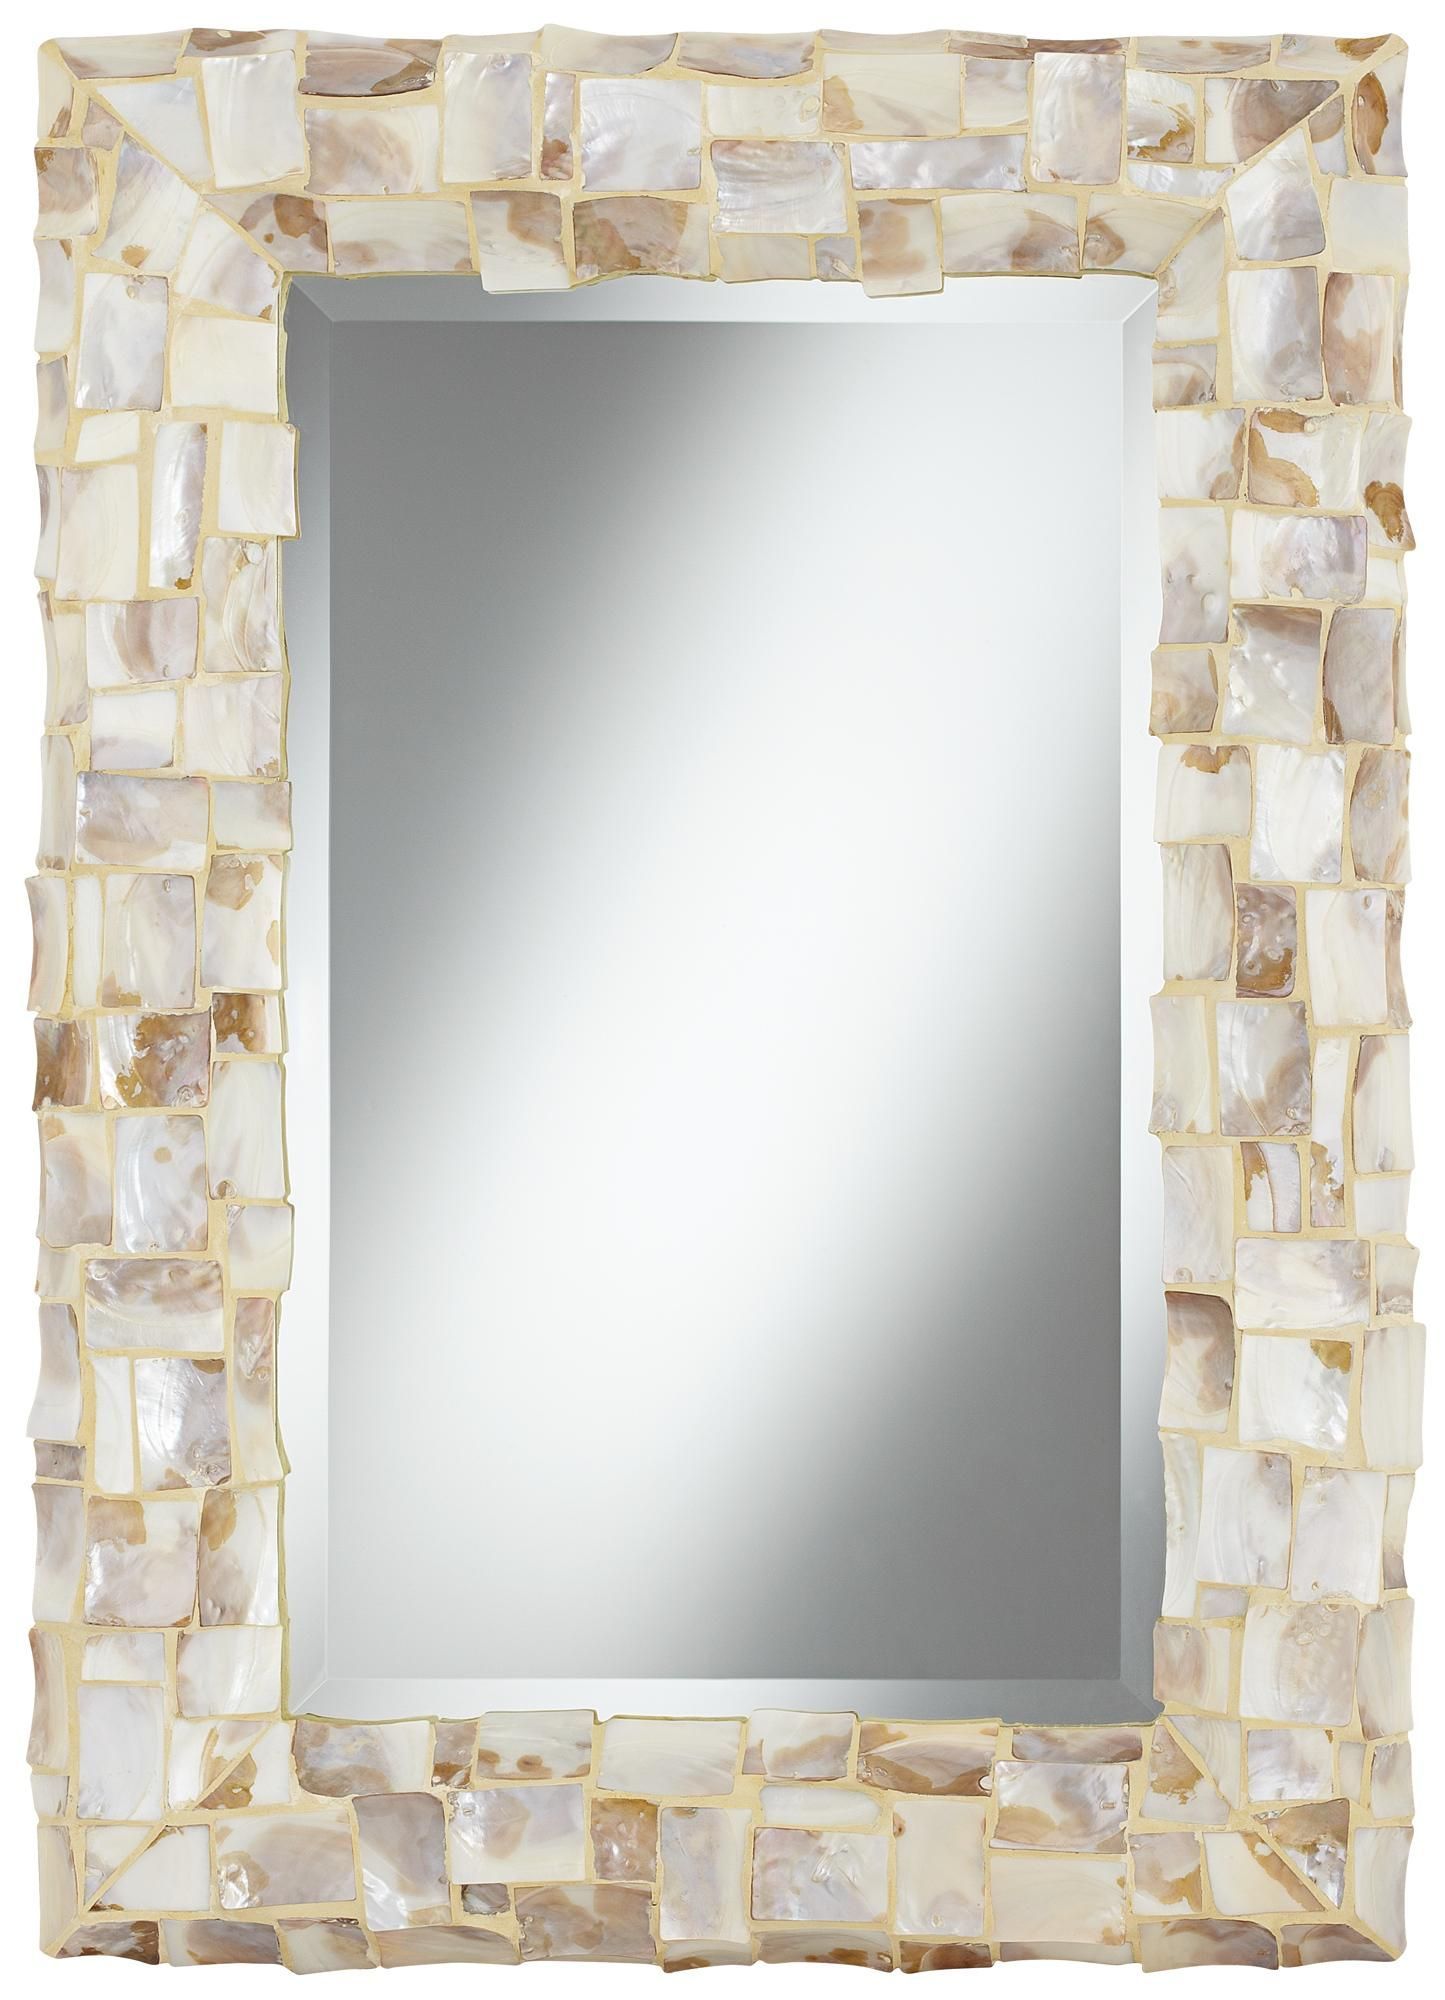 Sea Shell 33" High Mosaic Wall Mirror – #w8576 | Lamps Plus | Mirror Intended For High Wall Mirrors (View 6 of 15)